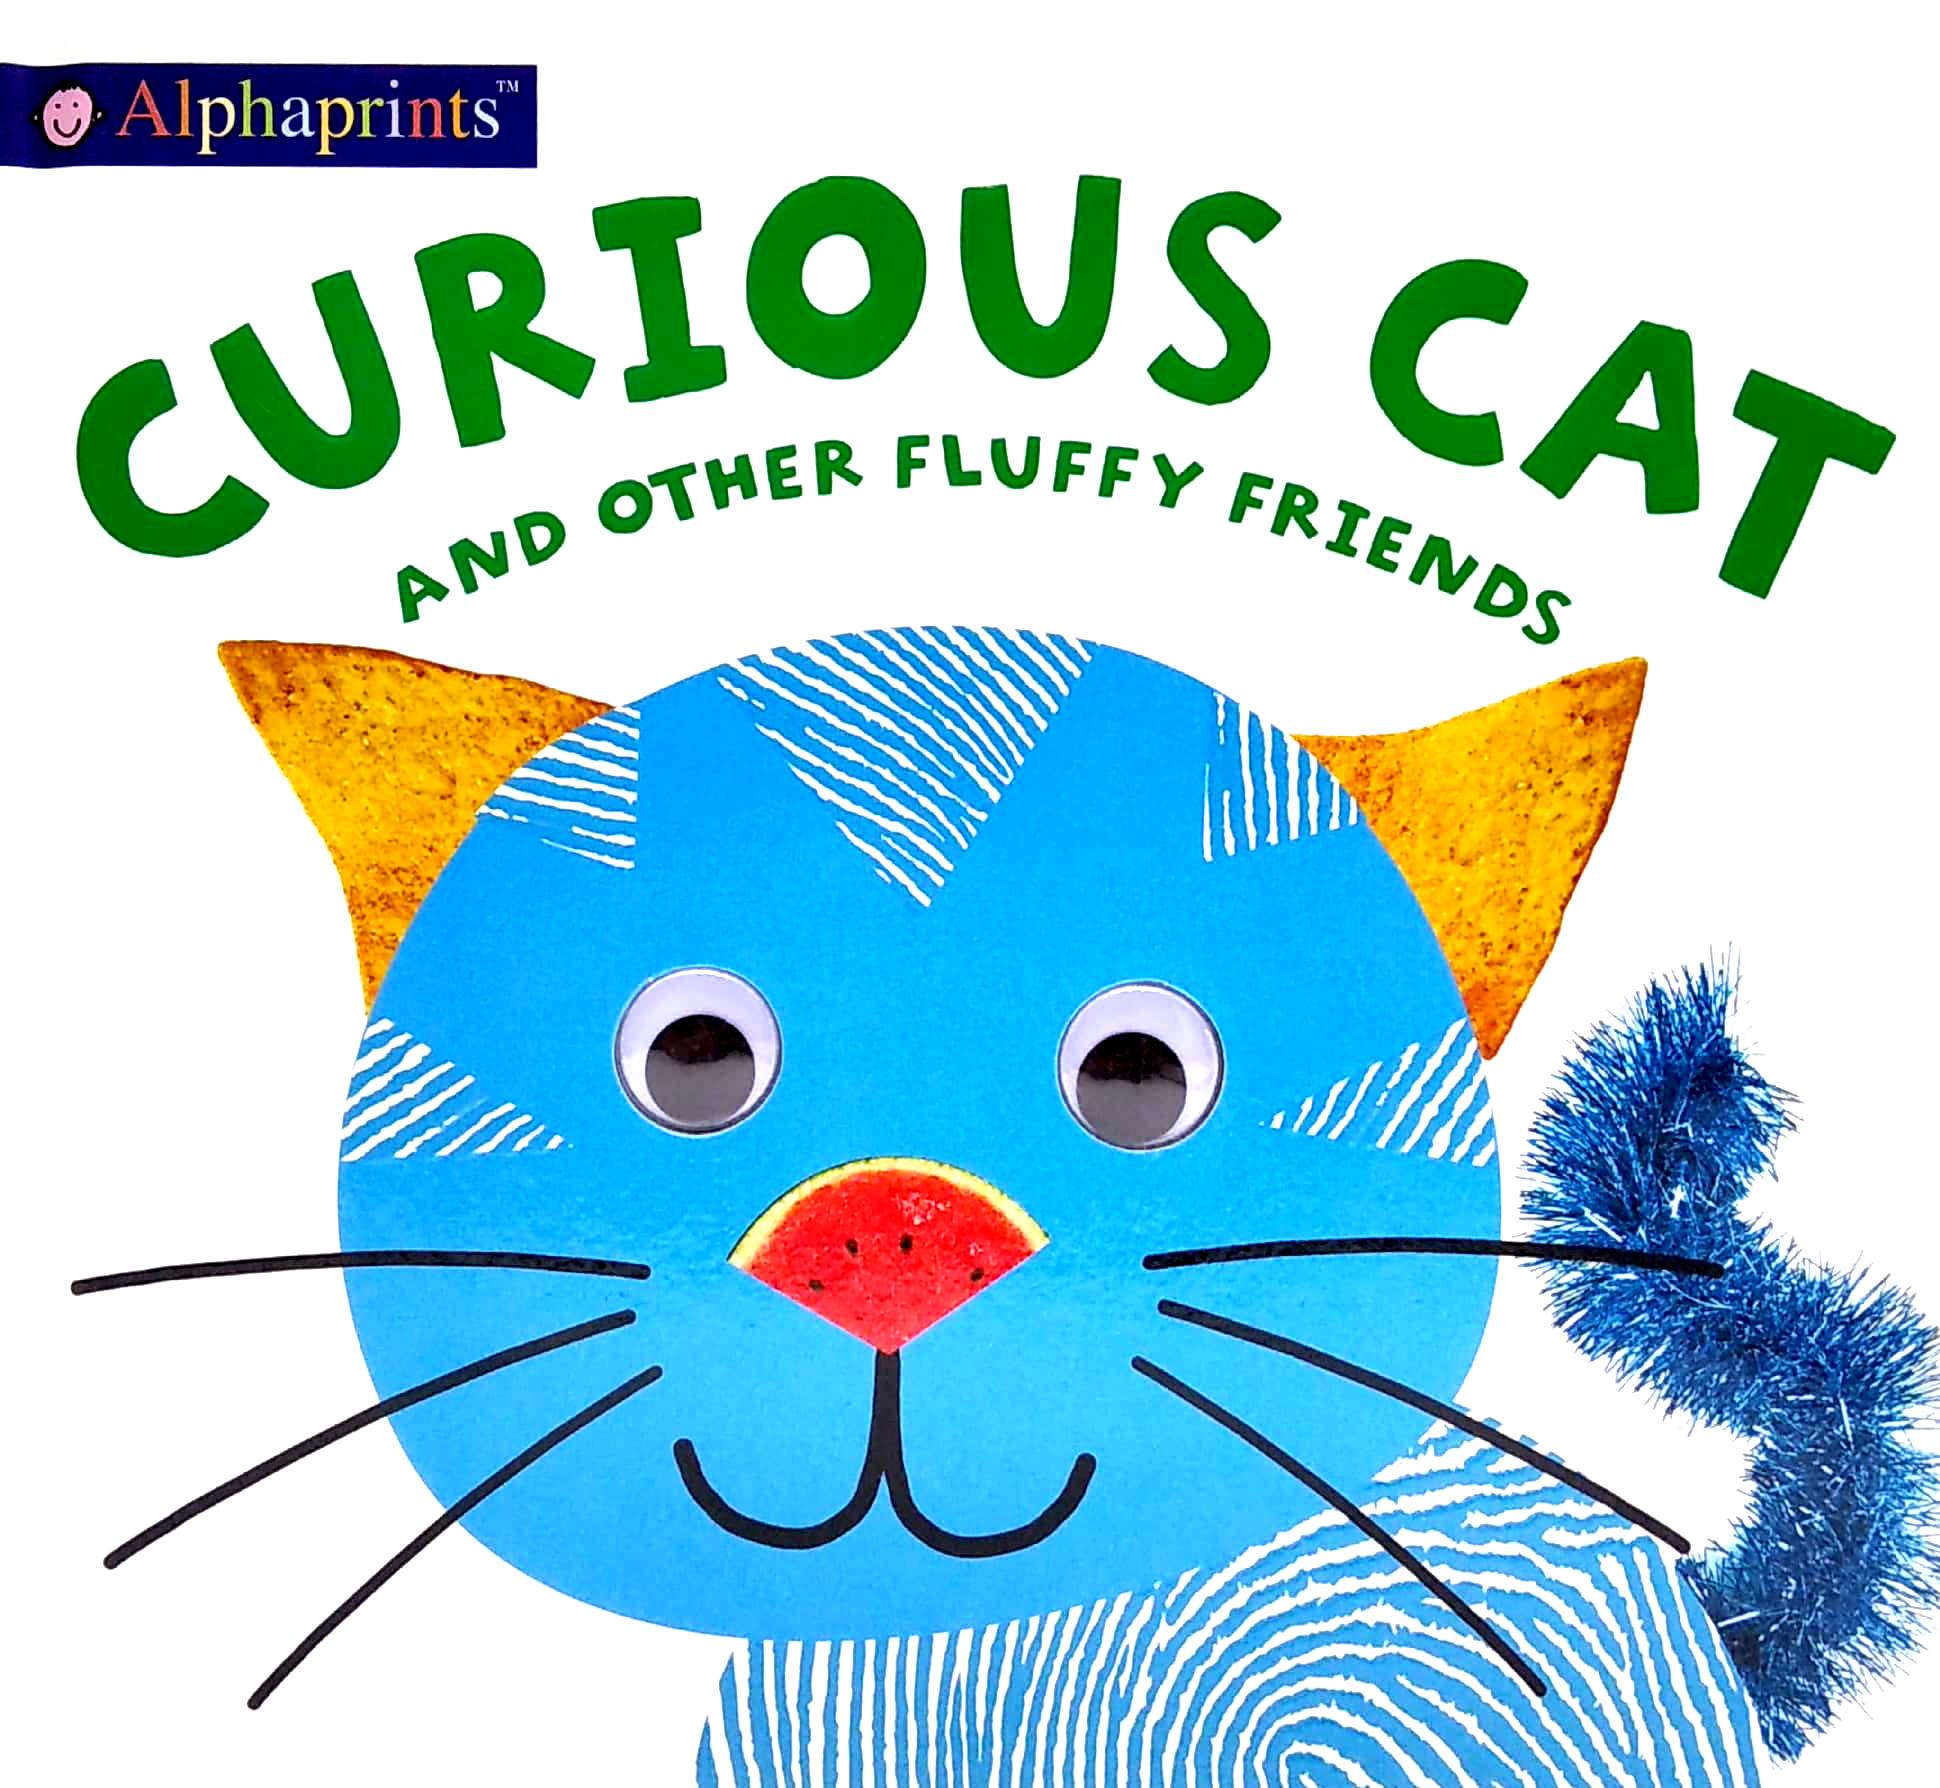 Alphaprints: Curious Cat And Other Fluffy Friends